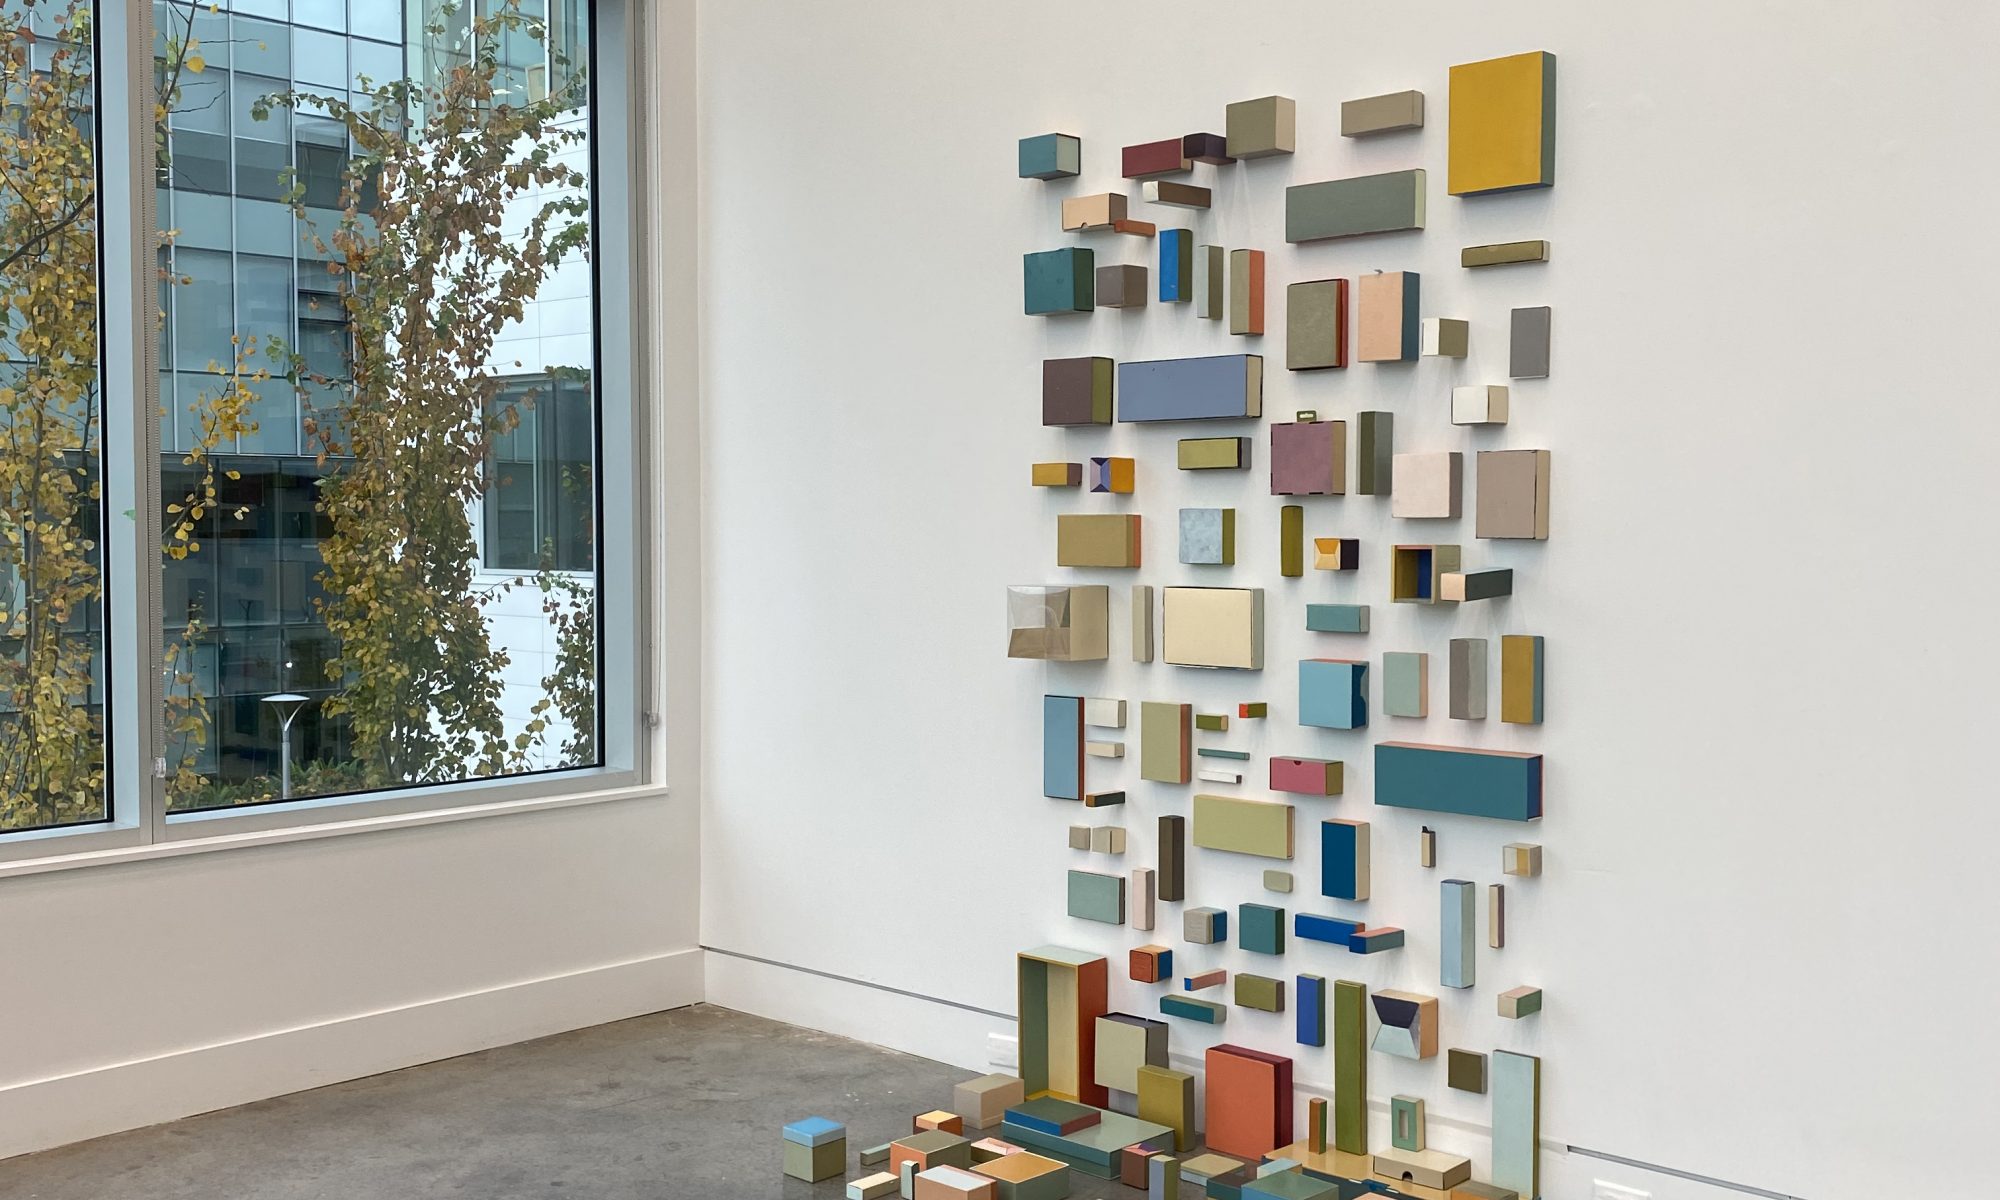 wall based installation comprised of 117 oil painted boxes